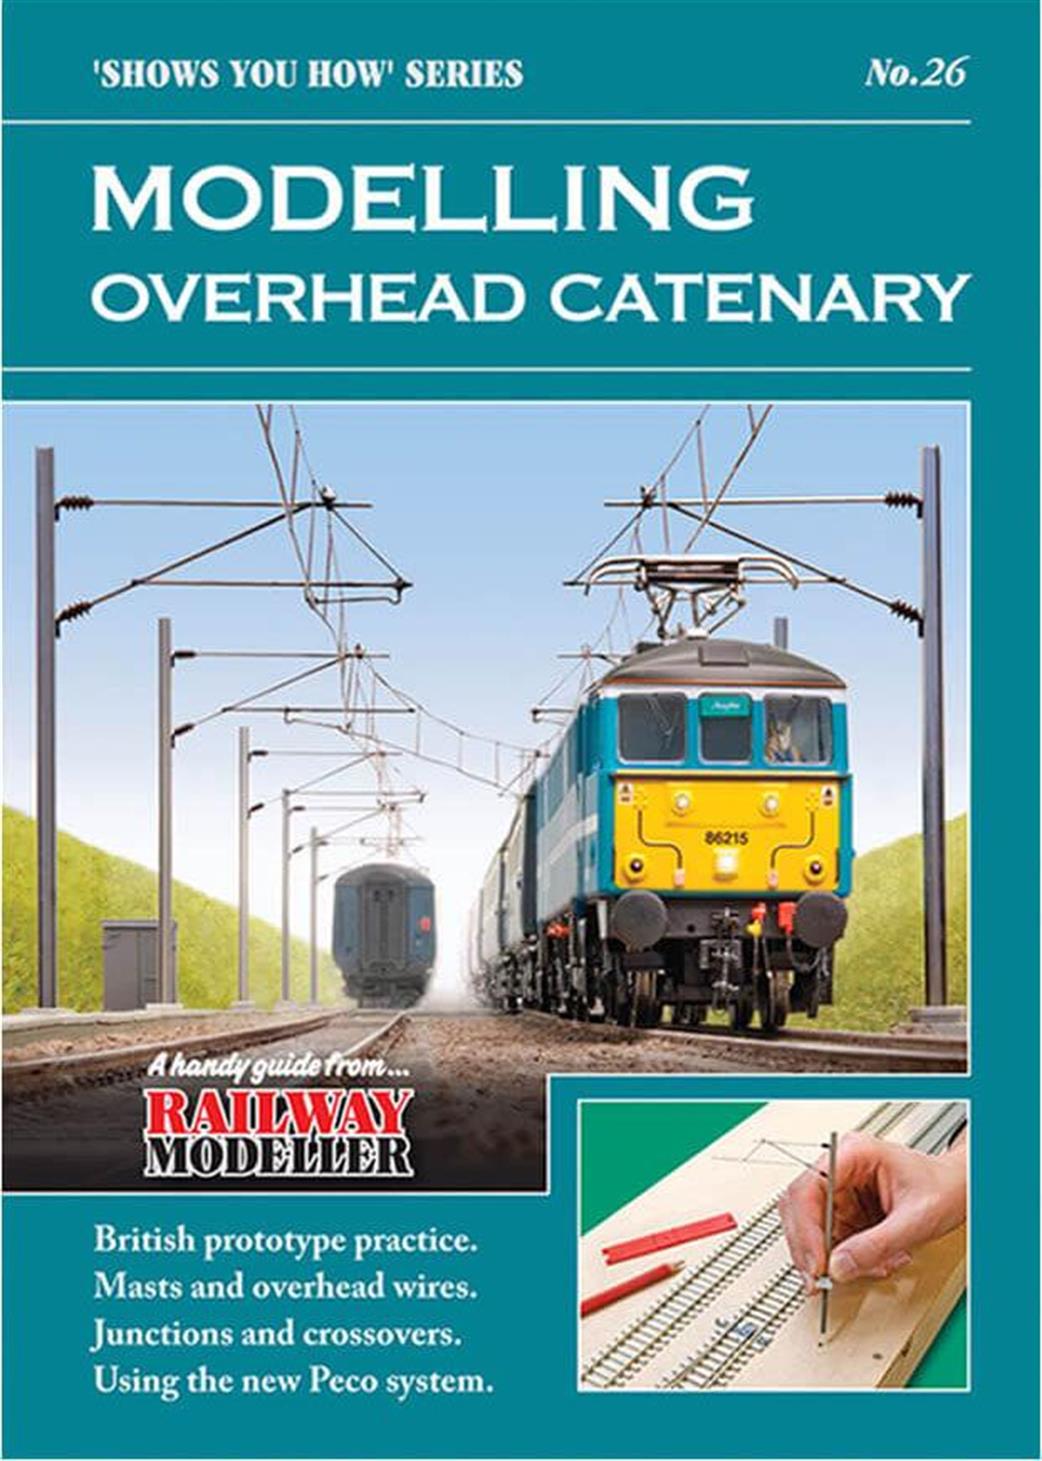 Peco SYH 26 Shows You How 26 Modelling Overhead Catenary